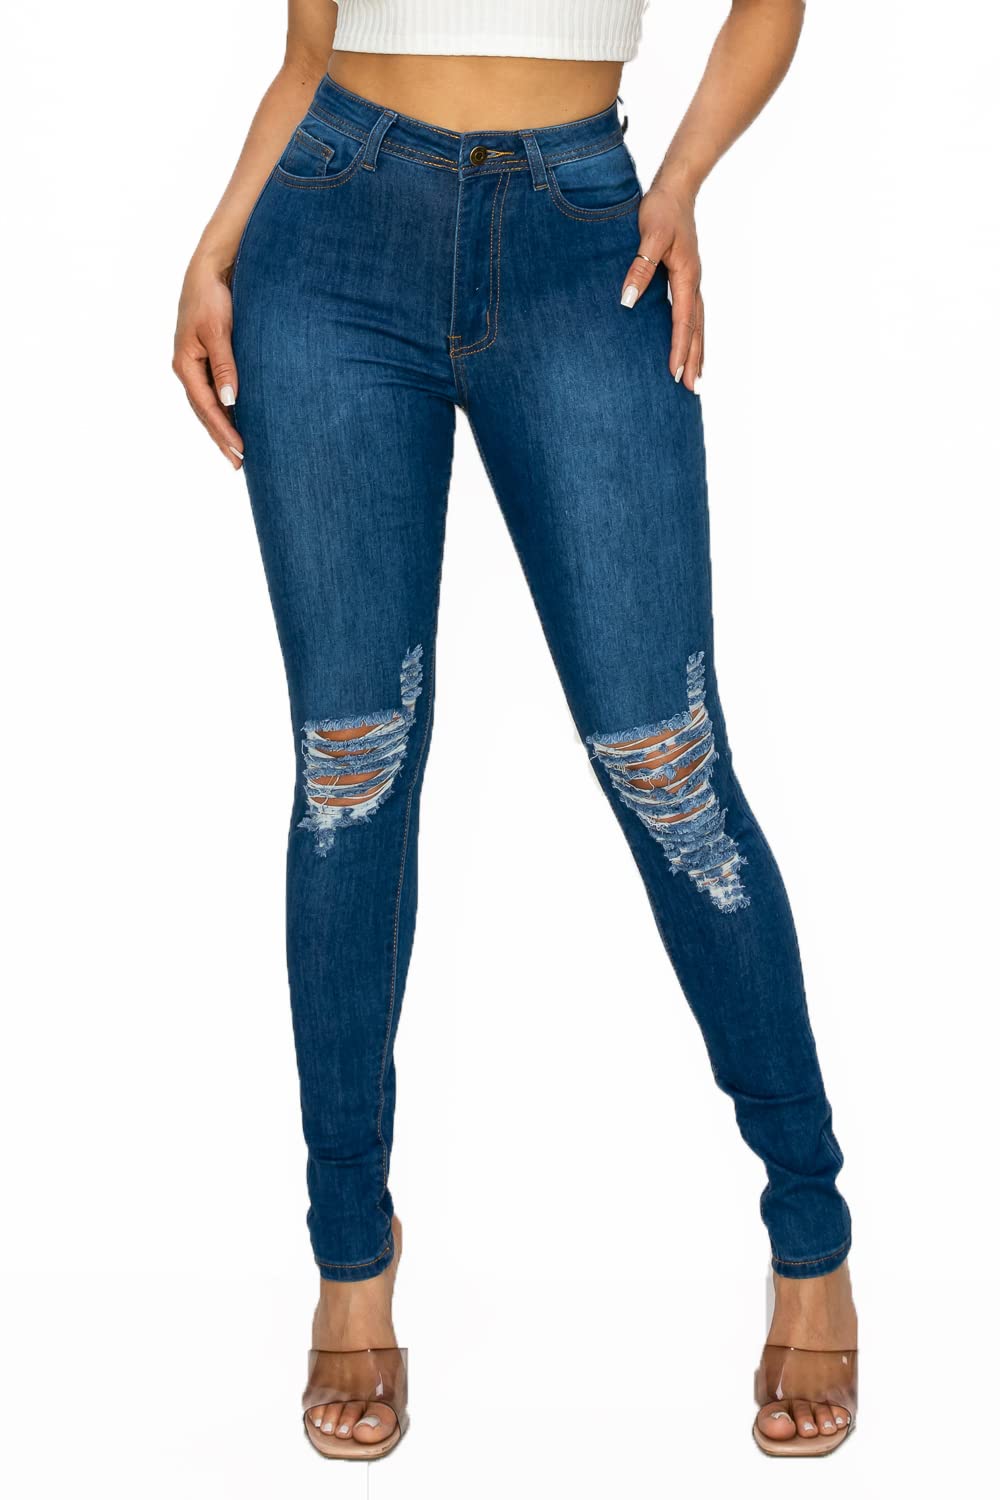 LOVER BRAND FASHION High Waisted-Rise Ladies Colored Denim Stretch